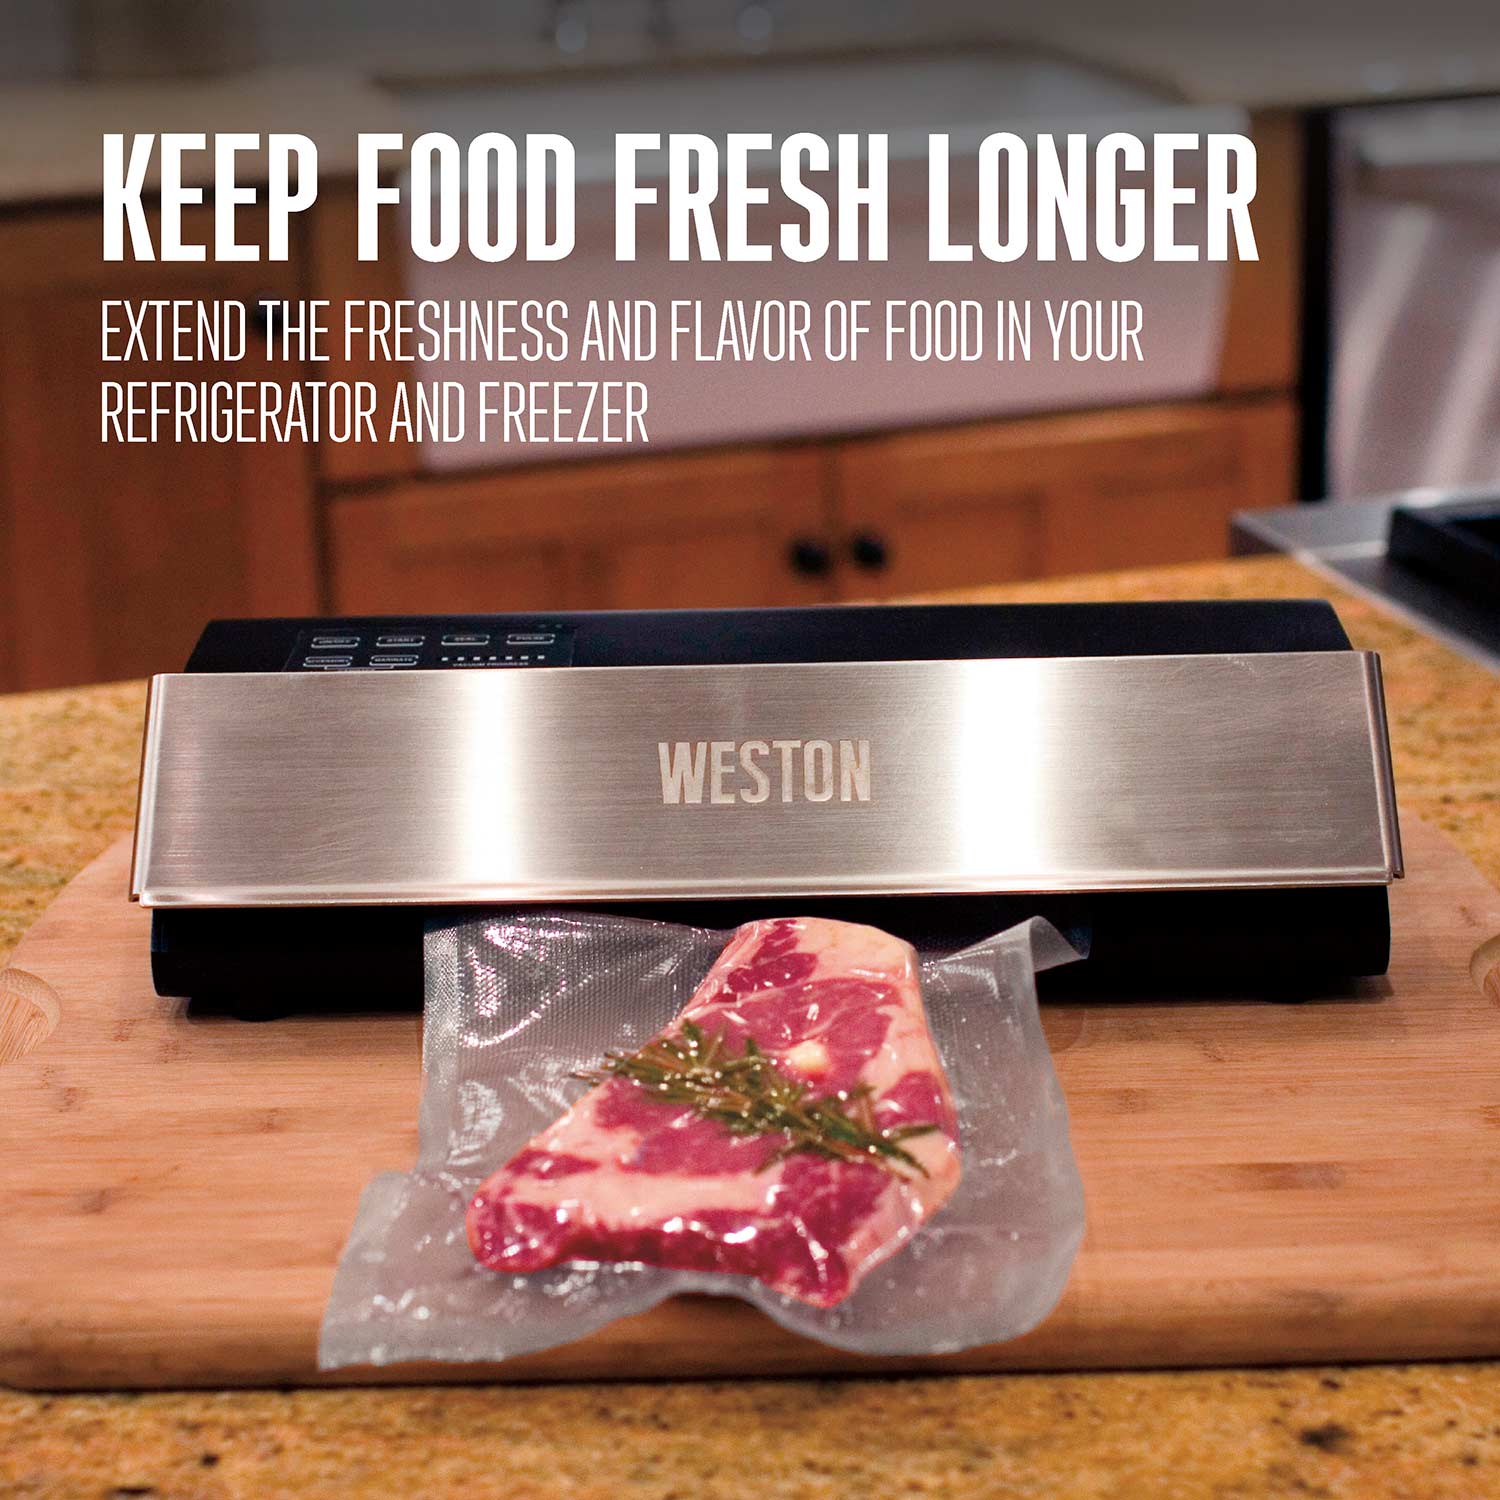 Vacuum Sealers: The Best Models for Keeping Food Fresher for